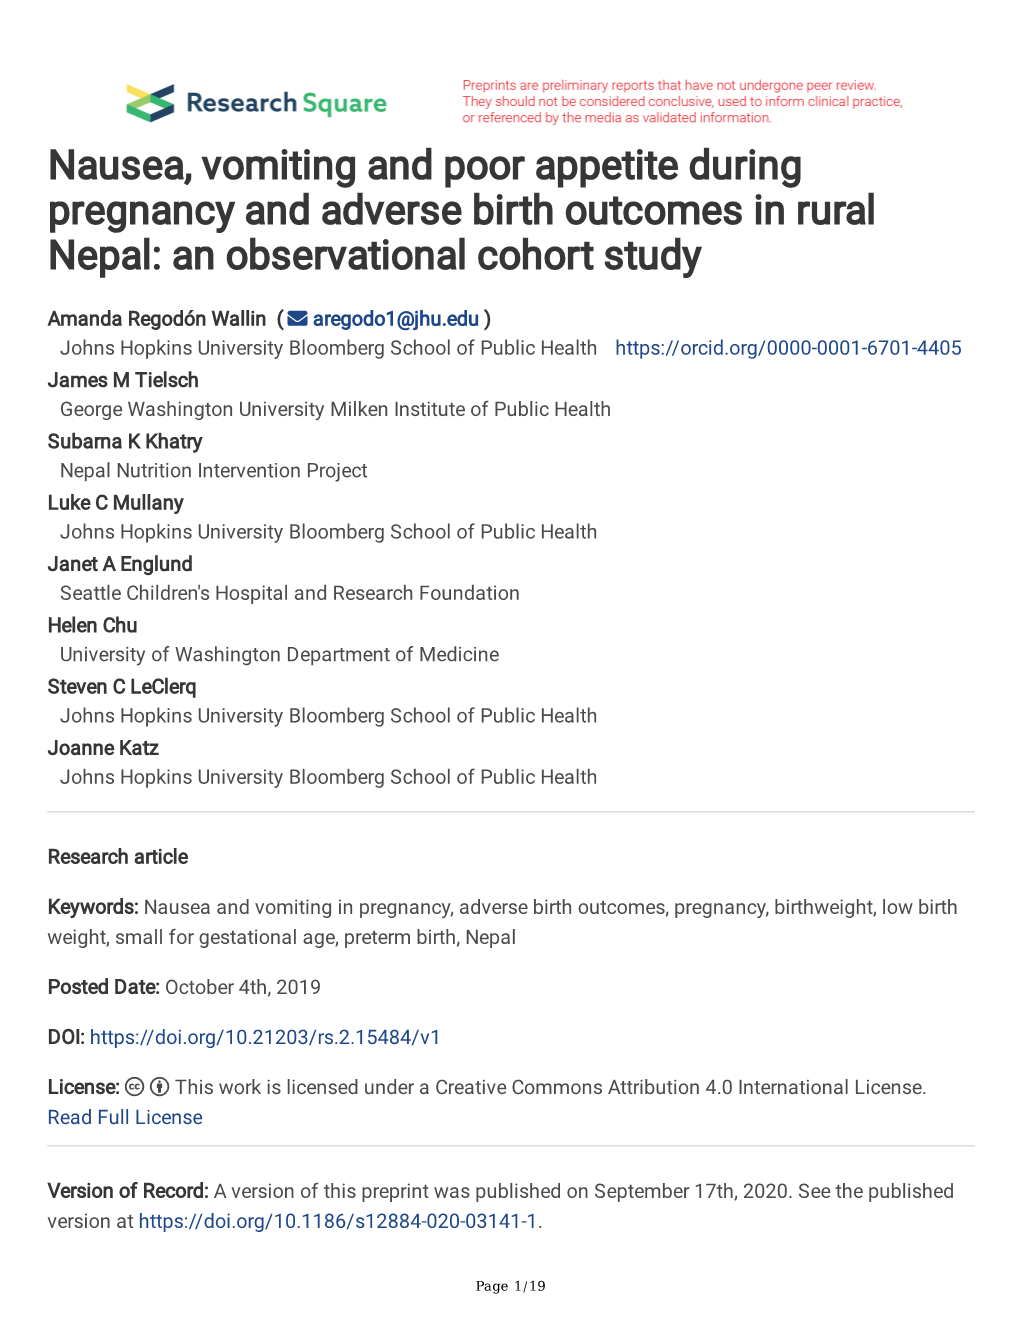 Nausea, Vomiting and Poor Appetite During Pregnancy and Adverse Birth Outcomes in Rural Nepal: an Observational Cohort Study